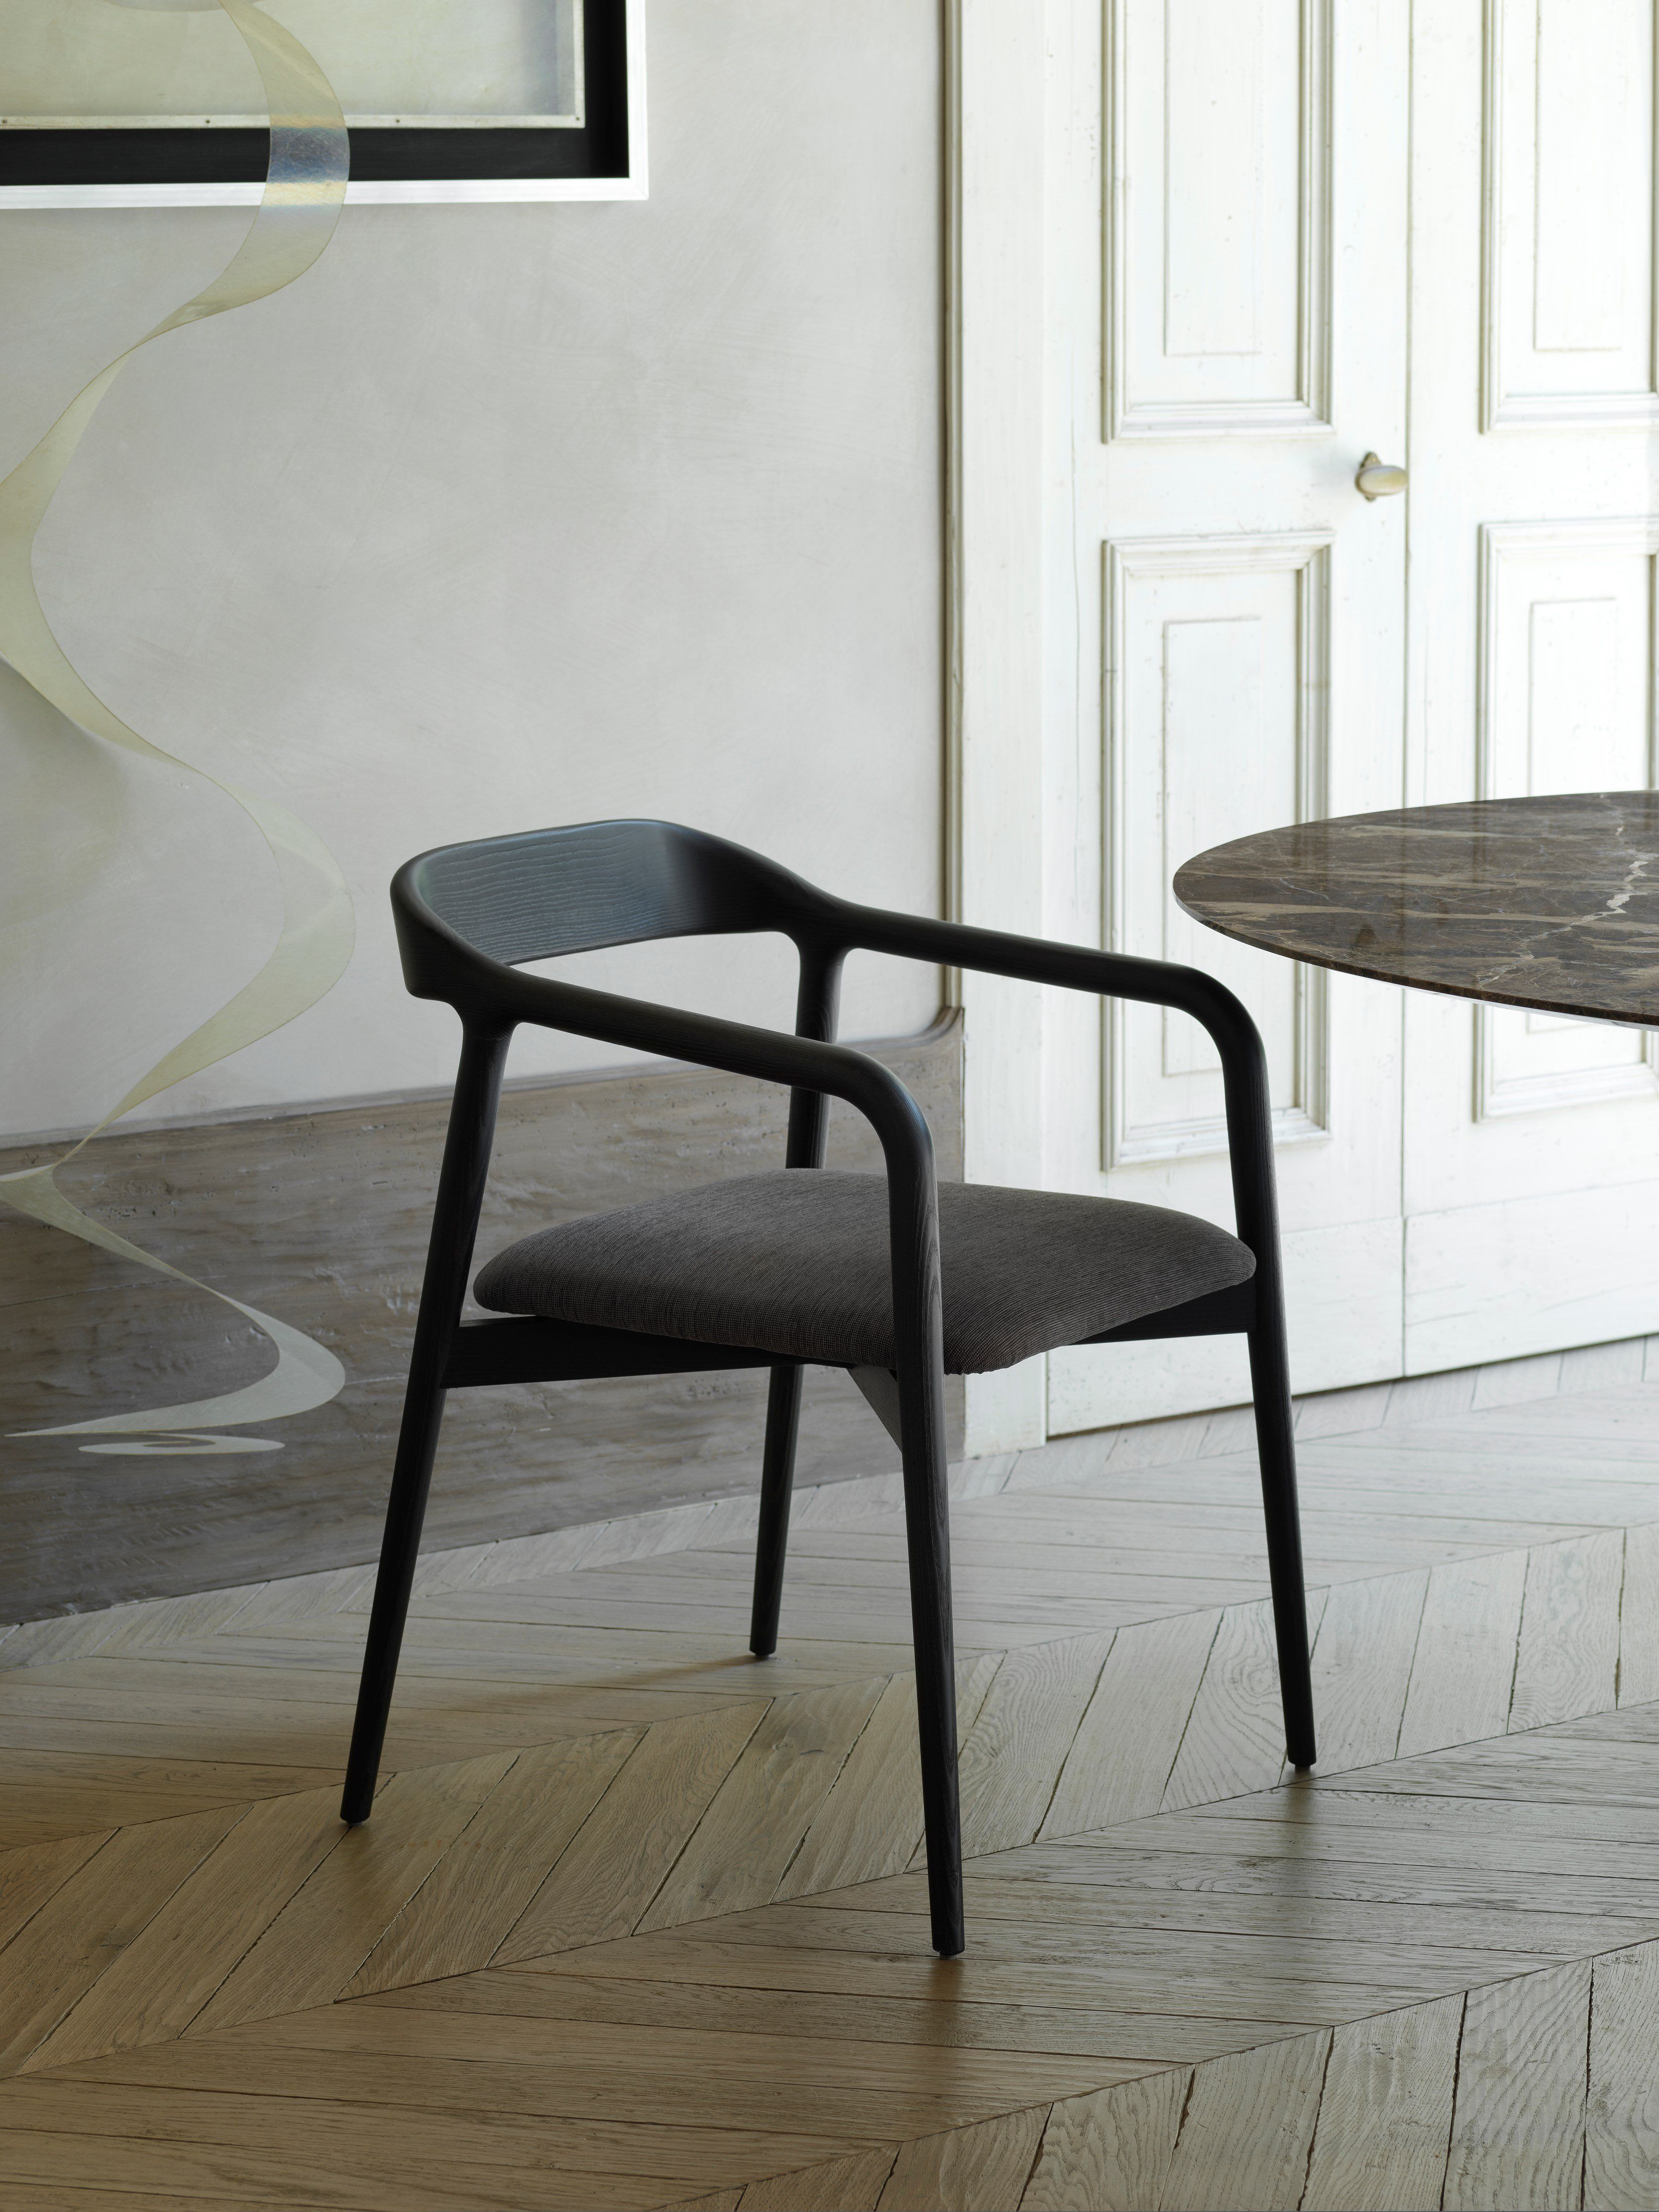 VELASCA chair by Casamania & Horm